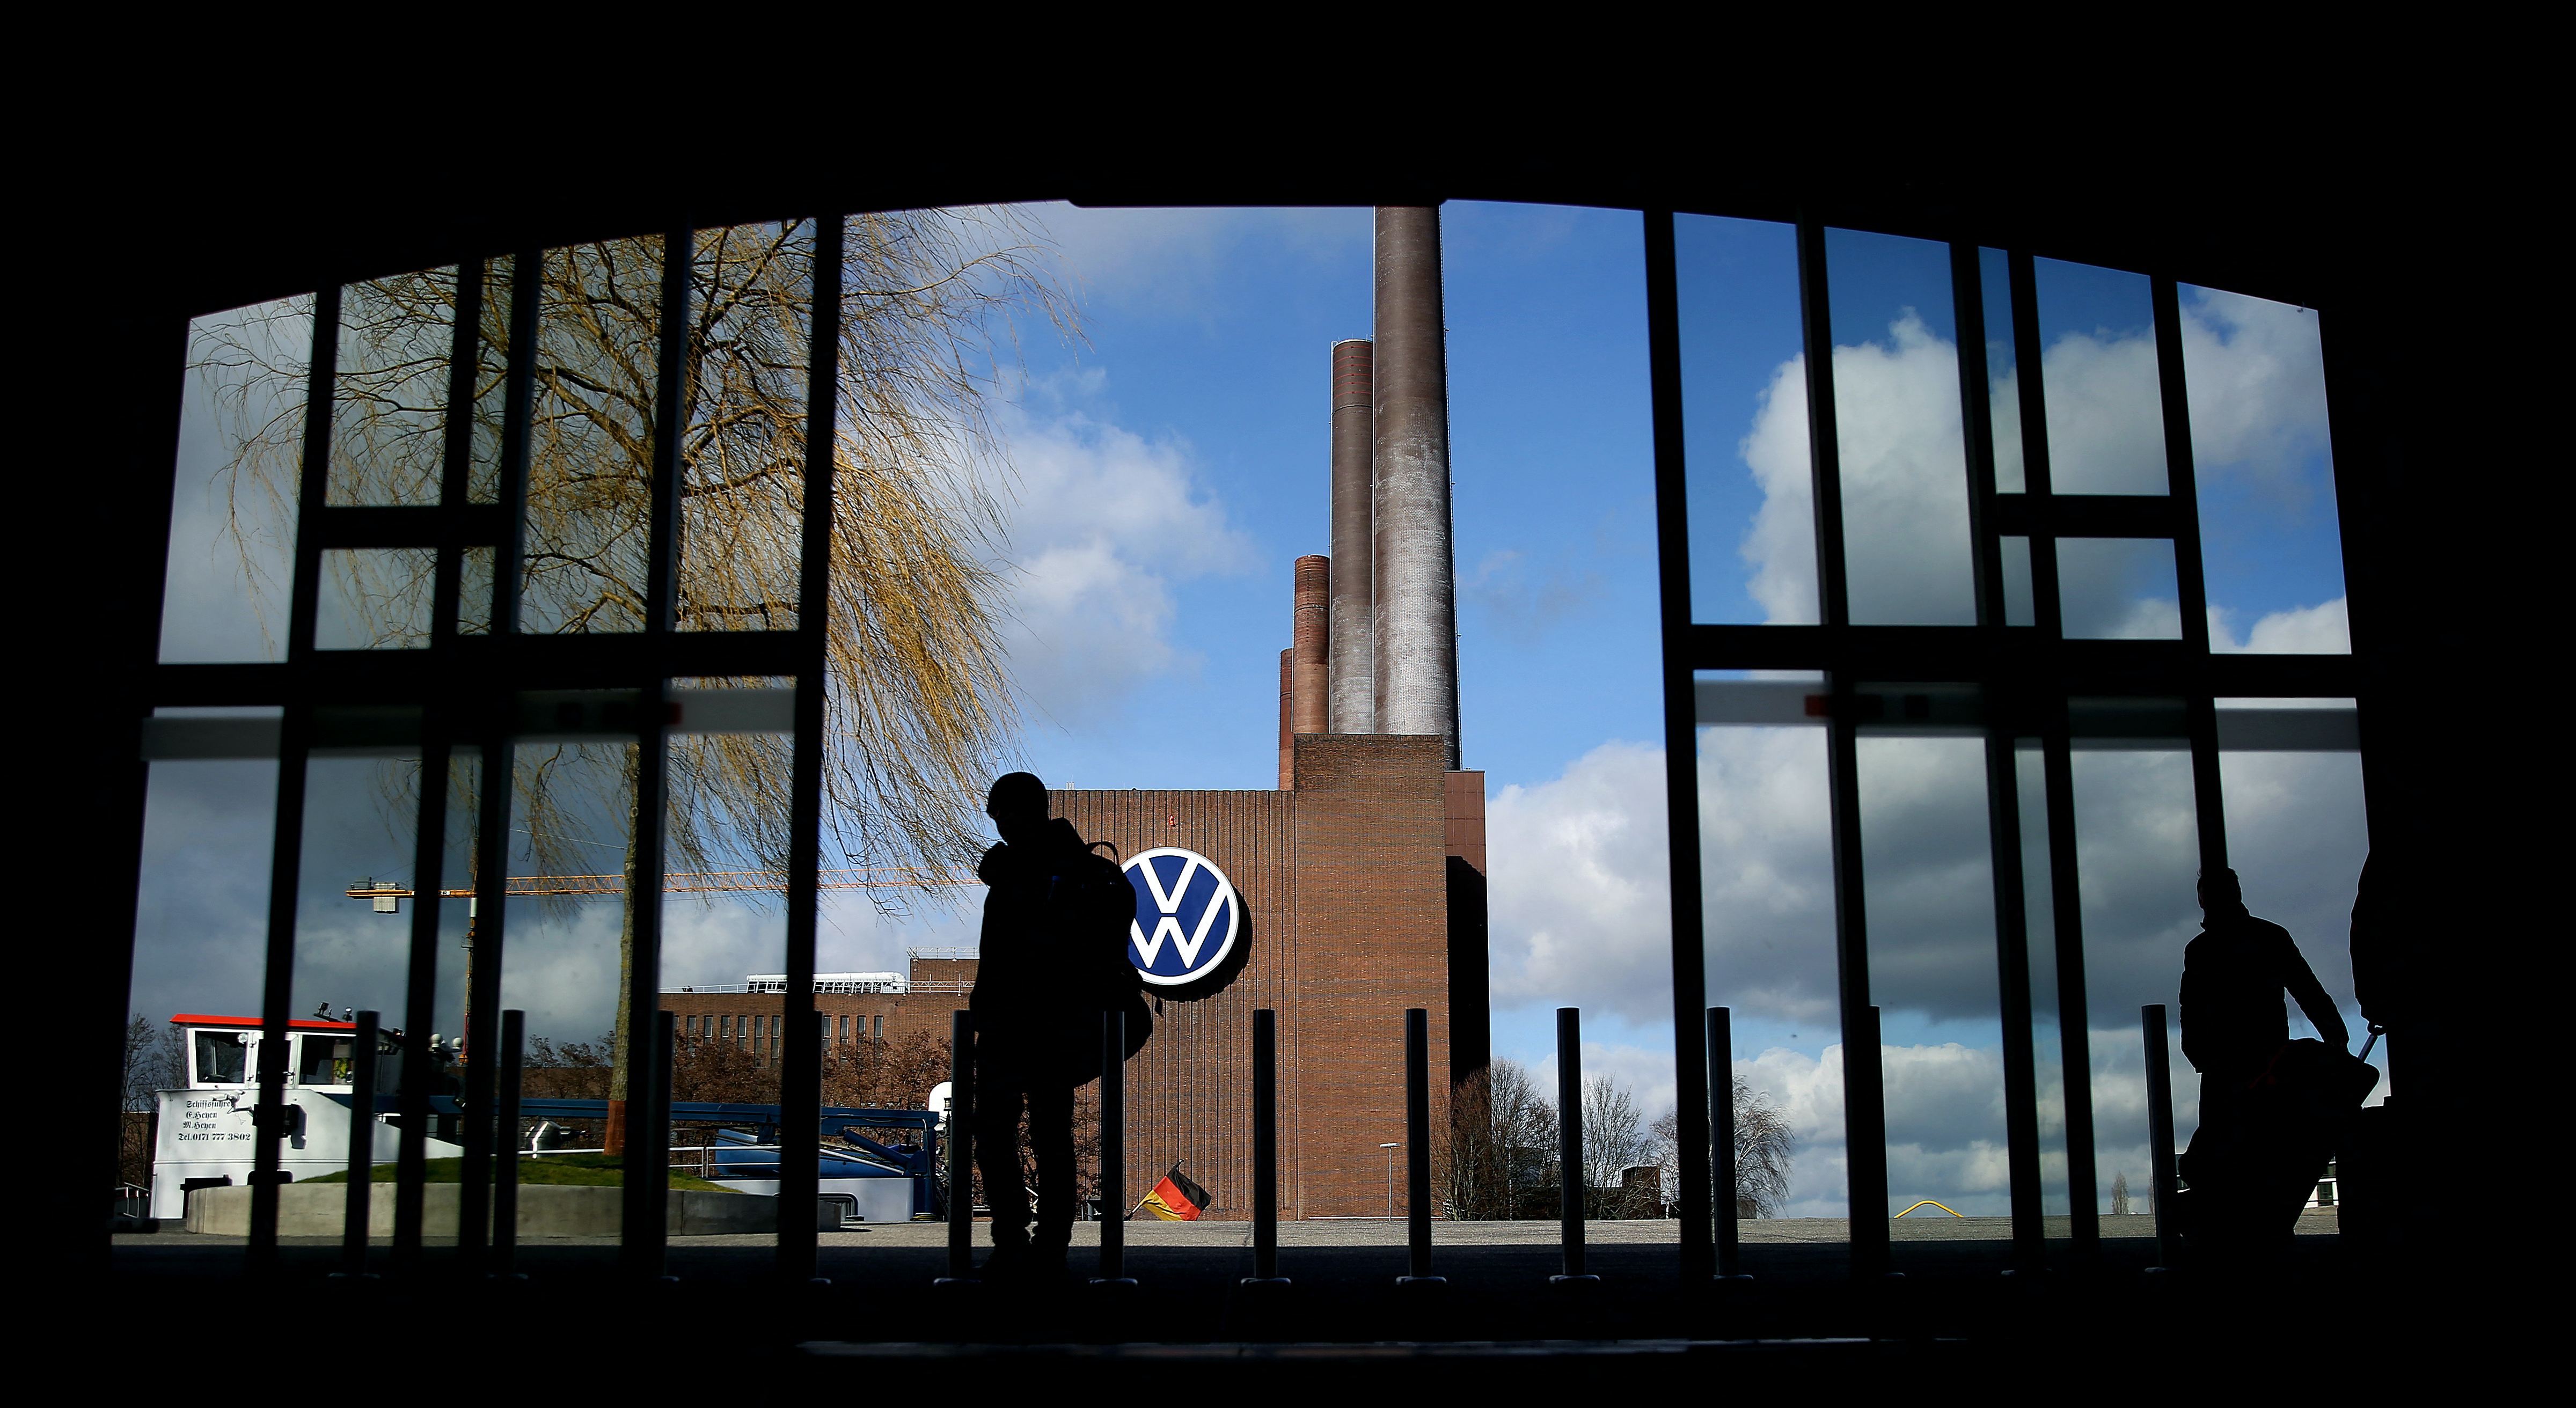 Concerns about ’30 000 possible job losses’ at Volkswagen